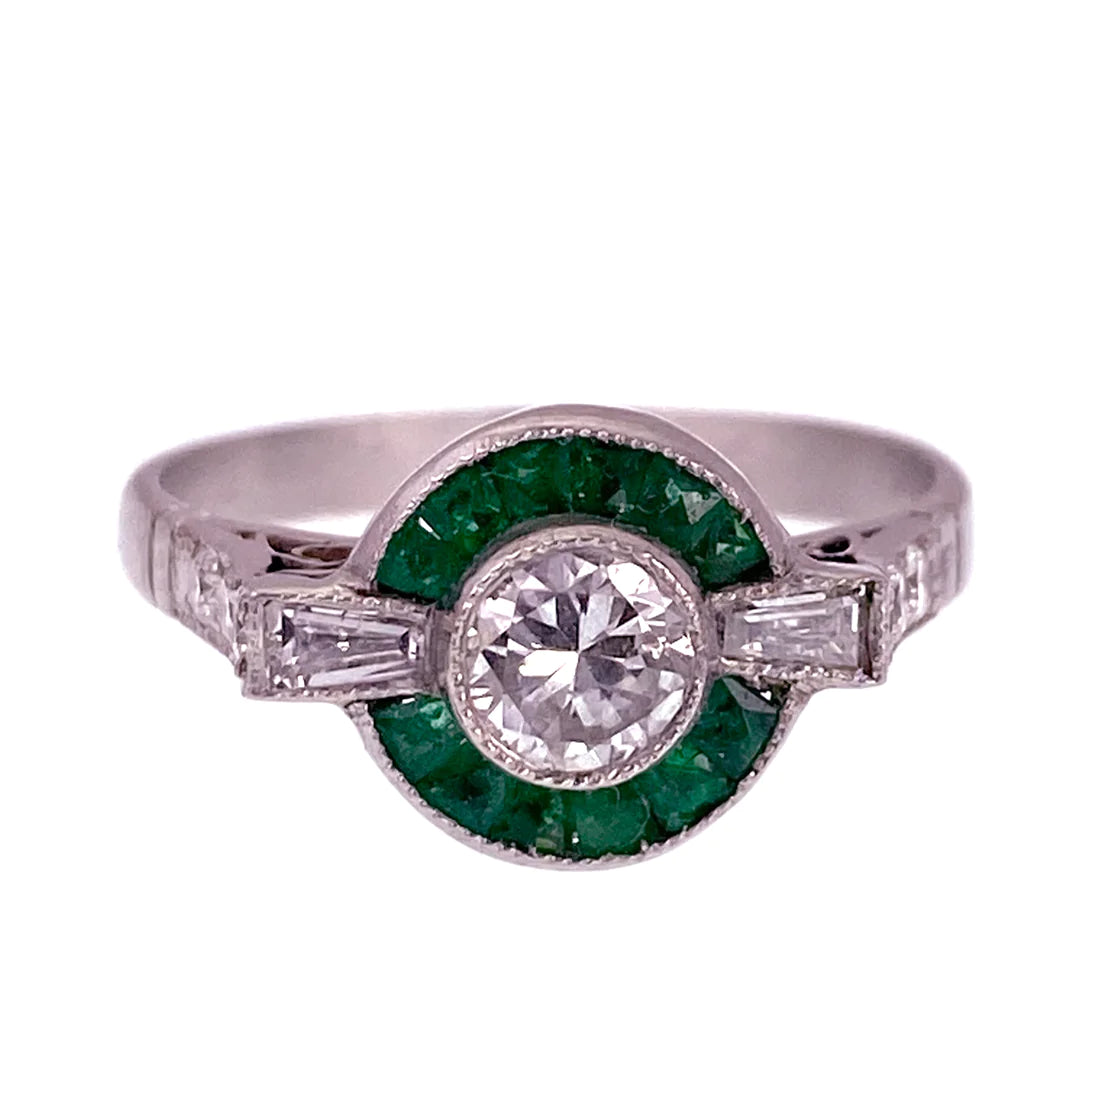 Incredible Art Deco All Original Platinum Target Ring with Emeralds and Diamonds